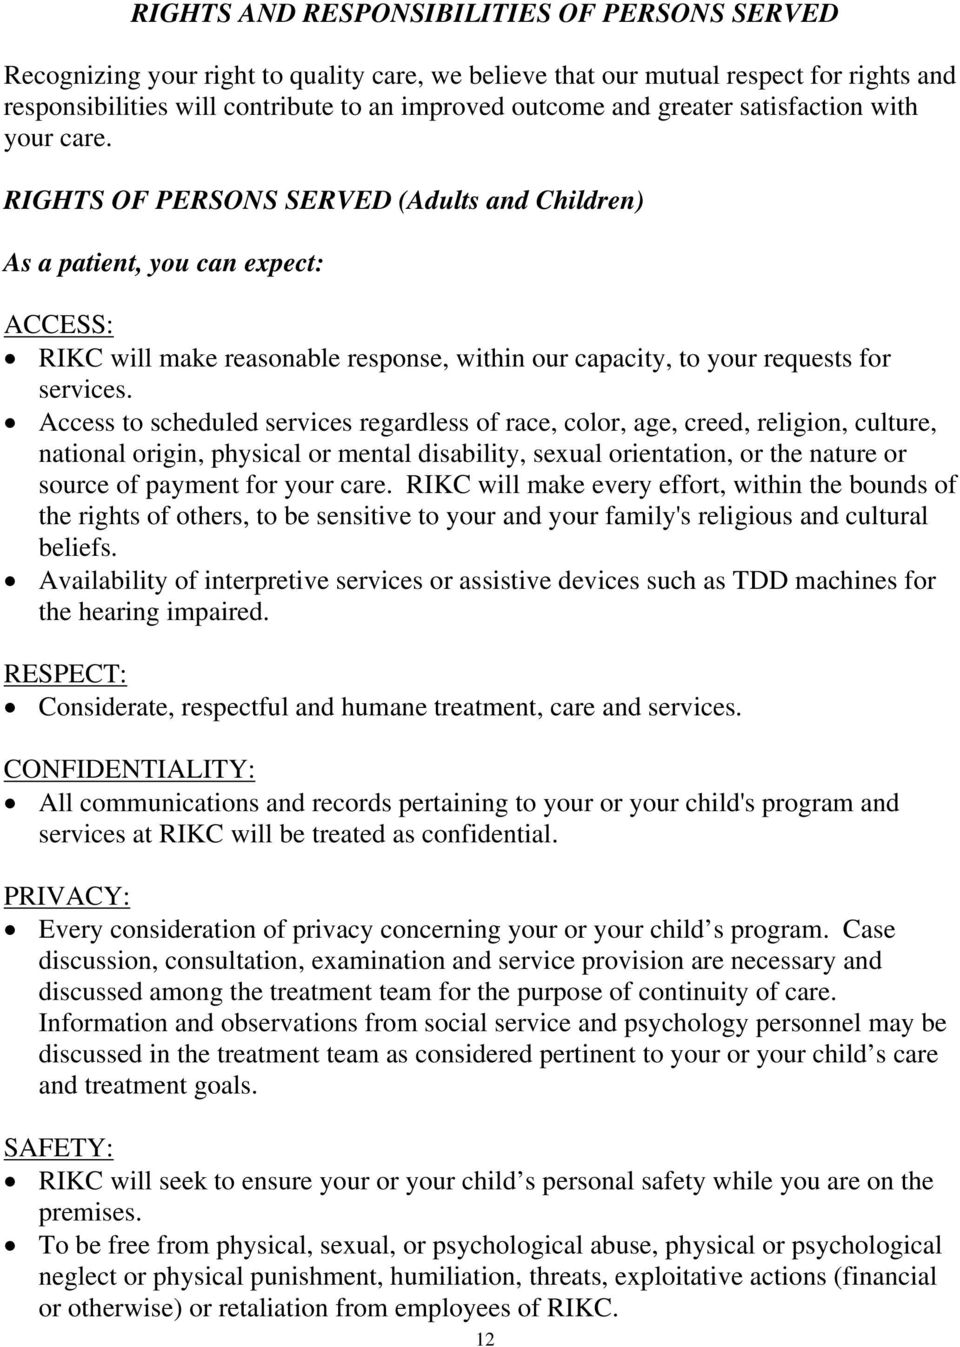 RIGHTS OF PERSONS SERVED (Adults and Children) As a patient, you can expect: ACCESS: RIKC will make reasonable response, within our capacity, to your requests for services.